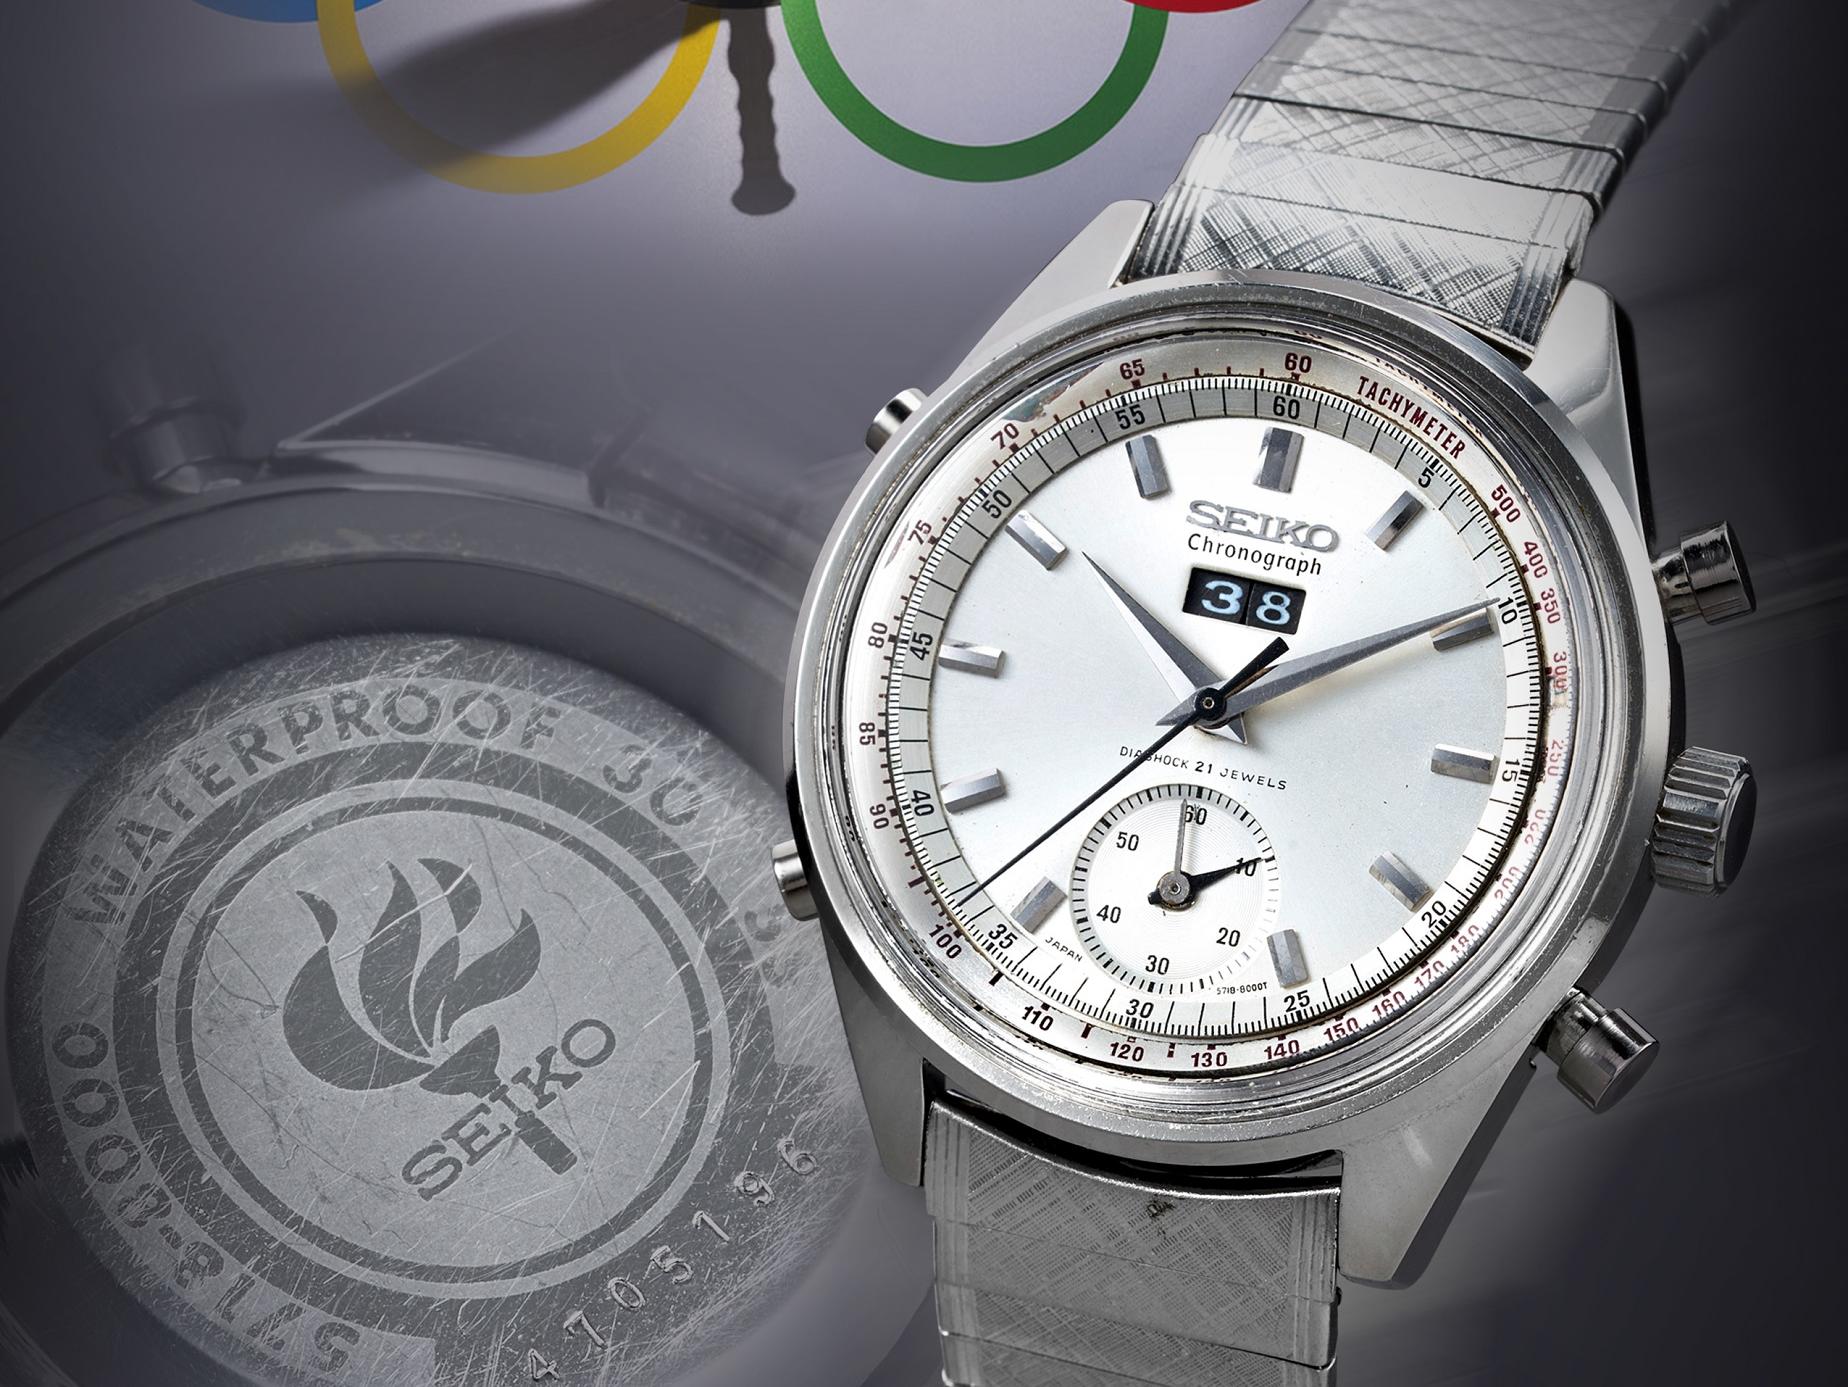 Seiko. A Stainless Steel Manual Wind Chronograph Bracelet Watch, 1964 Tokyo Olympics Officials' Watch with Lap Counter, Ref.5718-8000, No.4705196